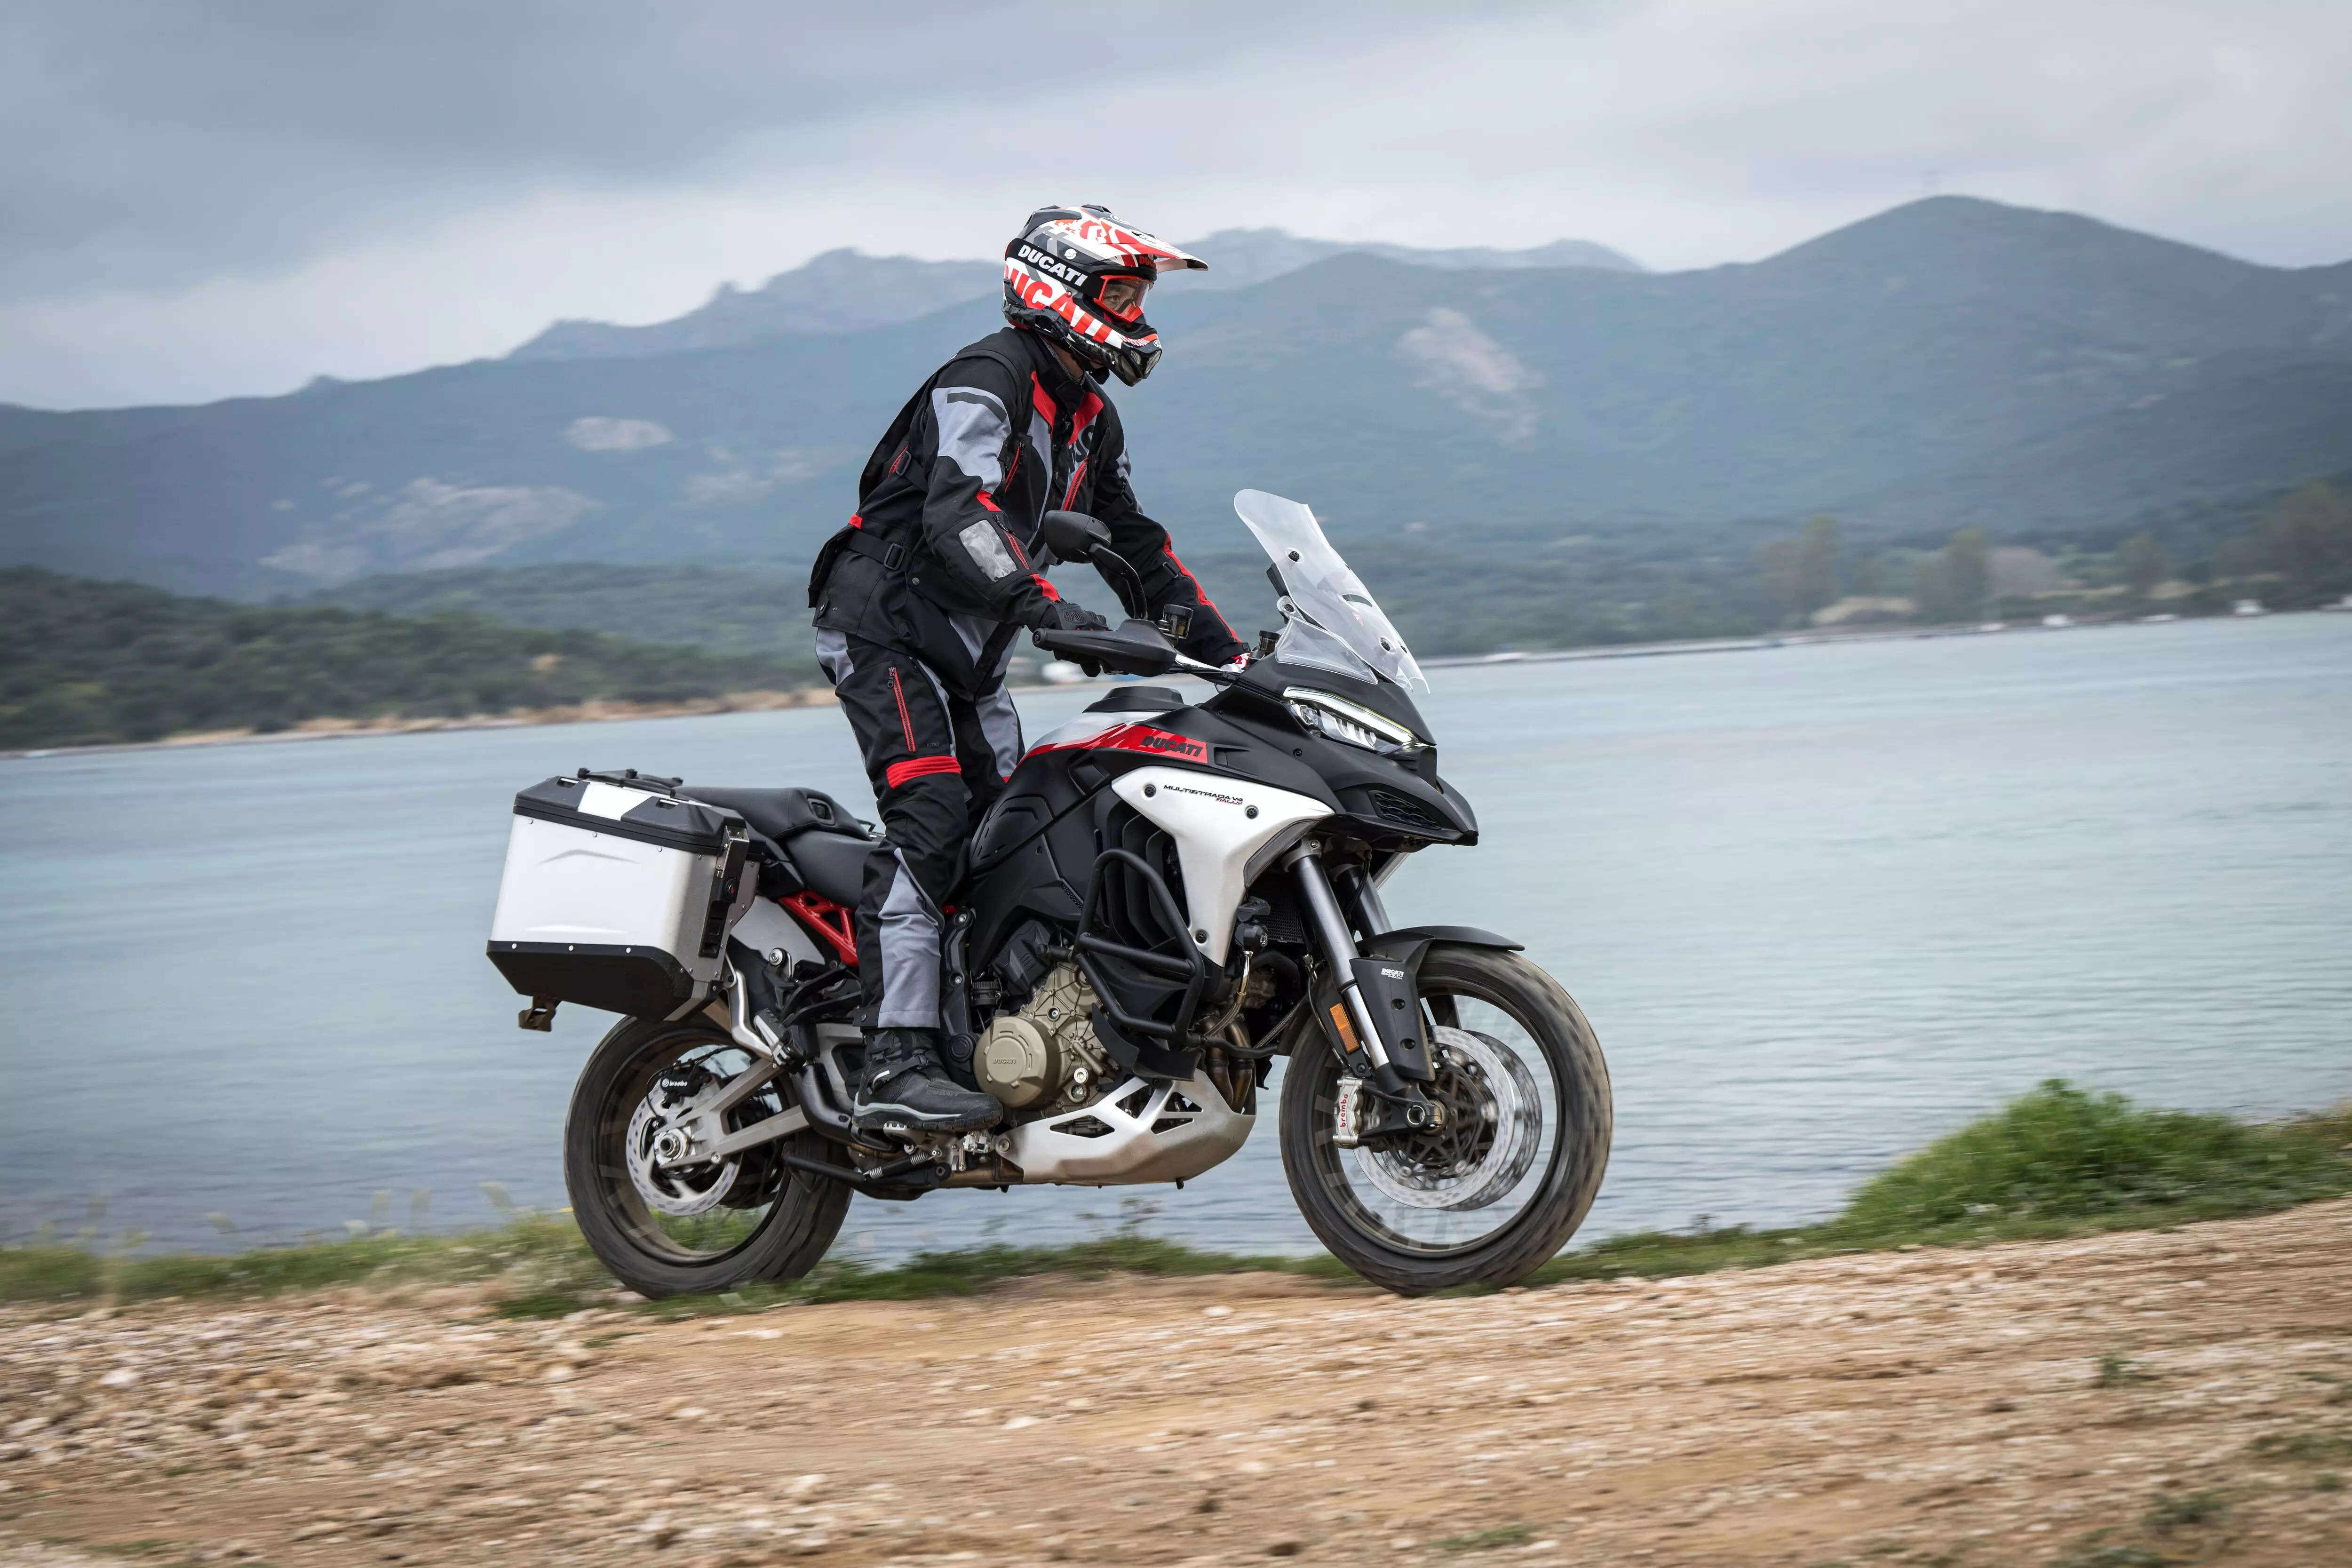 <p><br>The Multistrada V4 Rally prioritizes rider and passenger comfort, with a redesigned windshield, elongated tail, and improved legroom for the passenger. Customization options for rider and passenger heights are available. Innovative features like the Minimum Preload function and Easy Lift function enhance ease of use.</p>